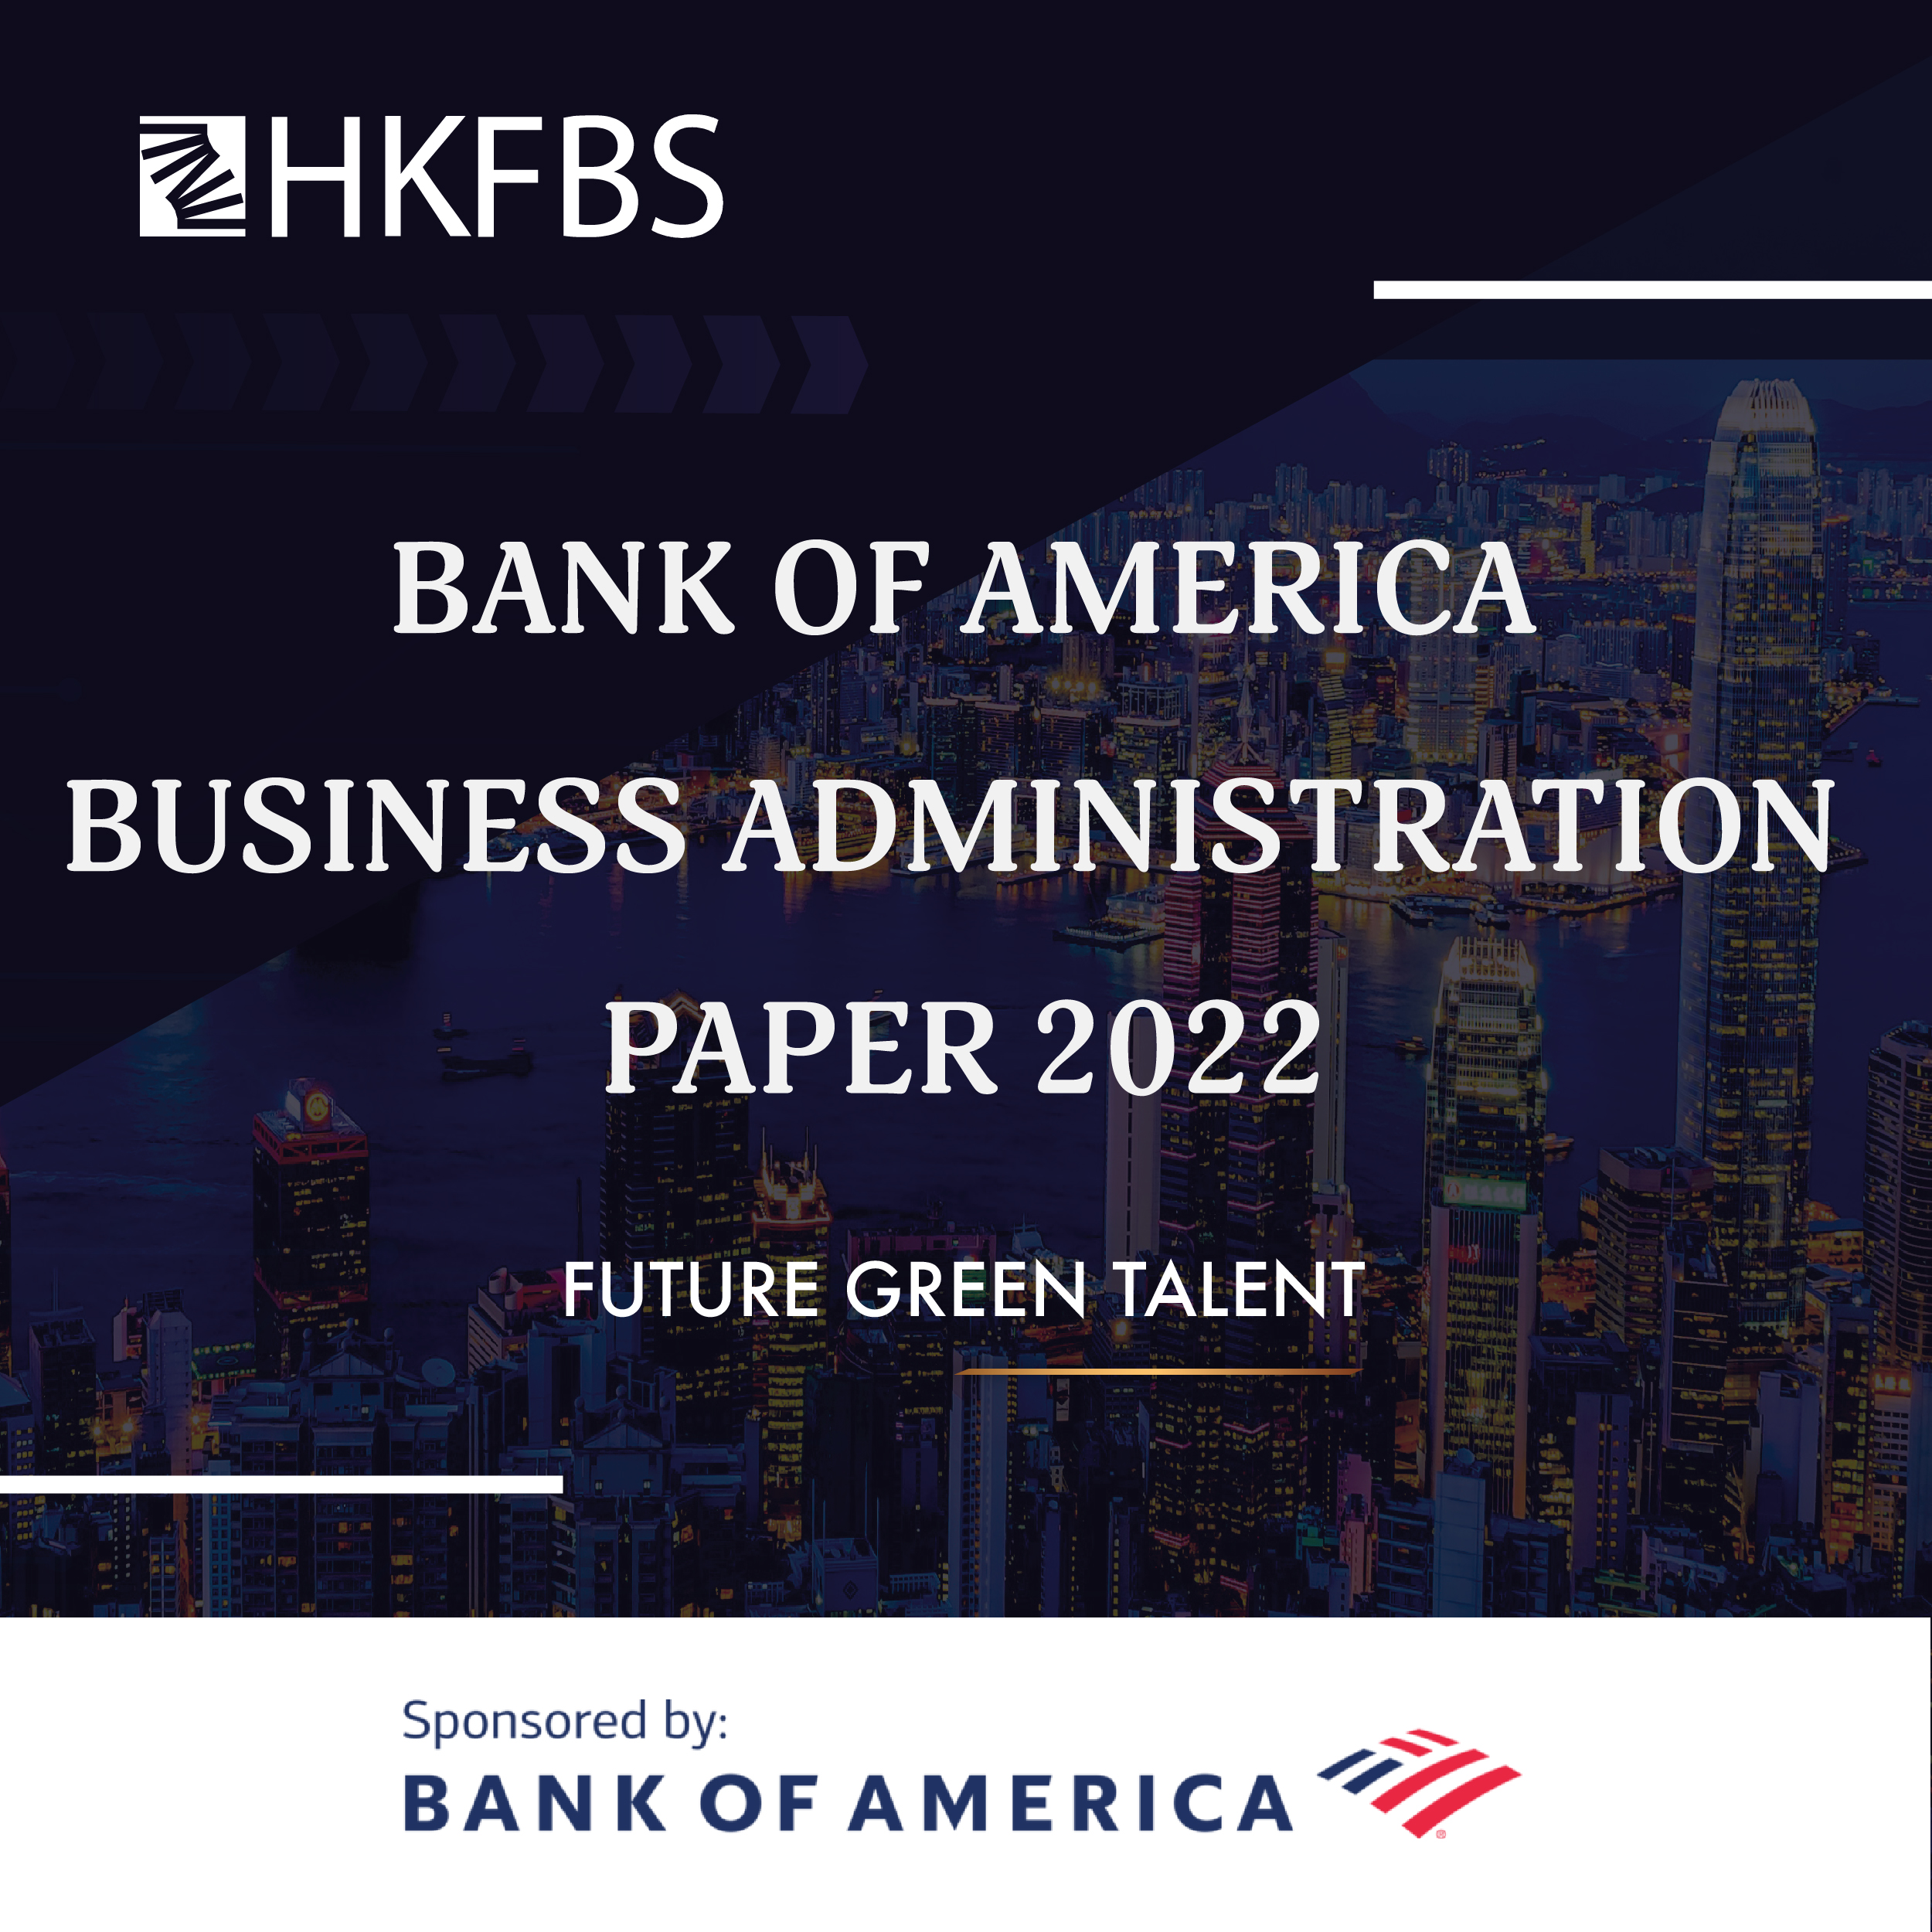 Bank of America Business Administration Paper 2022 